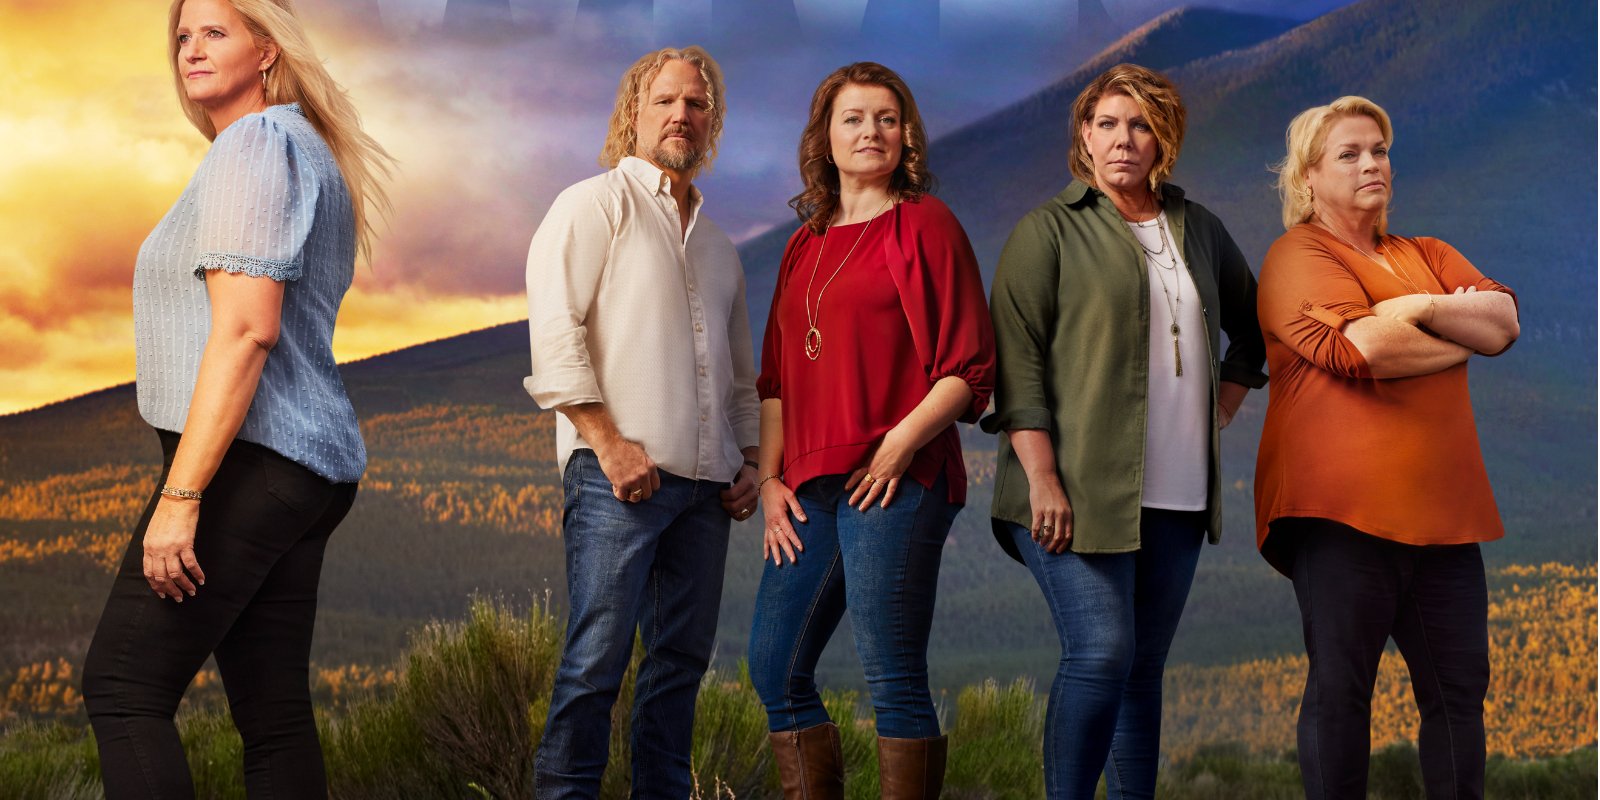 Christine, Kody, Robyn, Meri, and Janelle Brown in a 'Sister Wives.' promotional photo